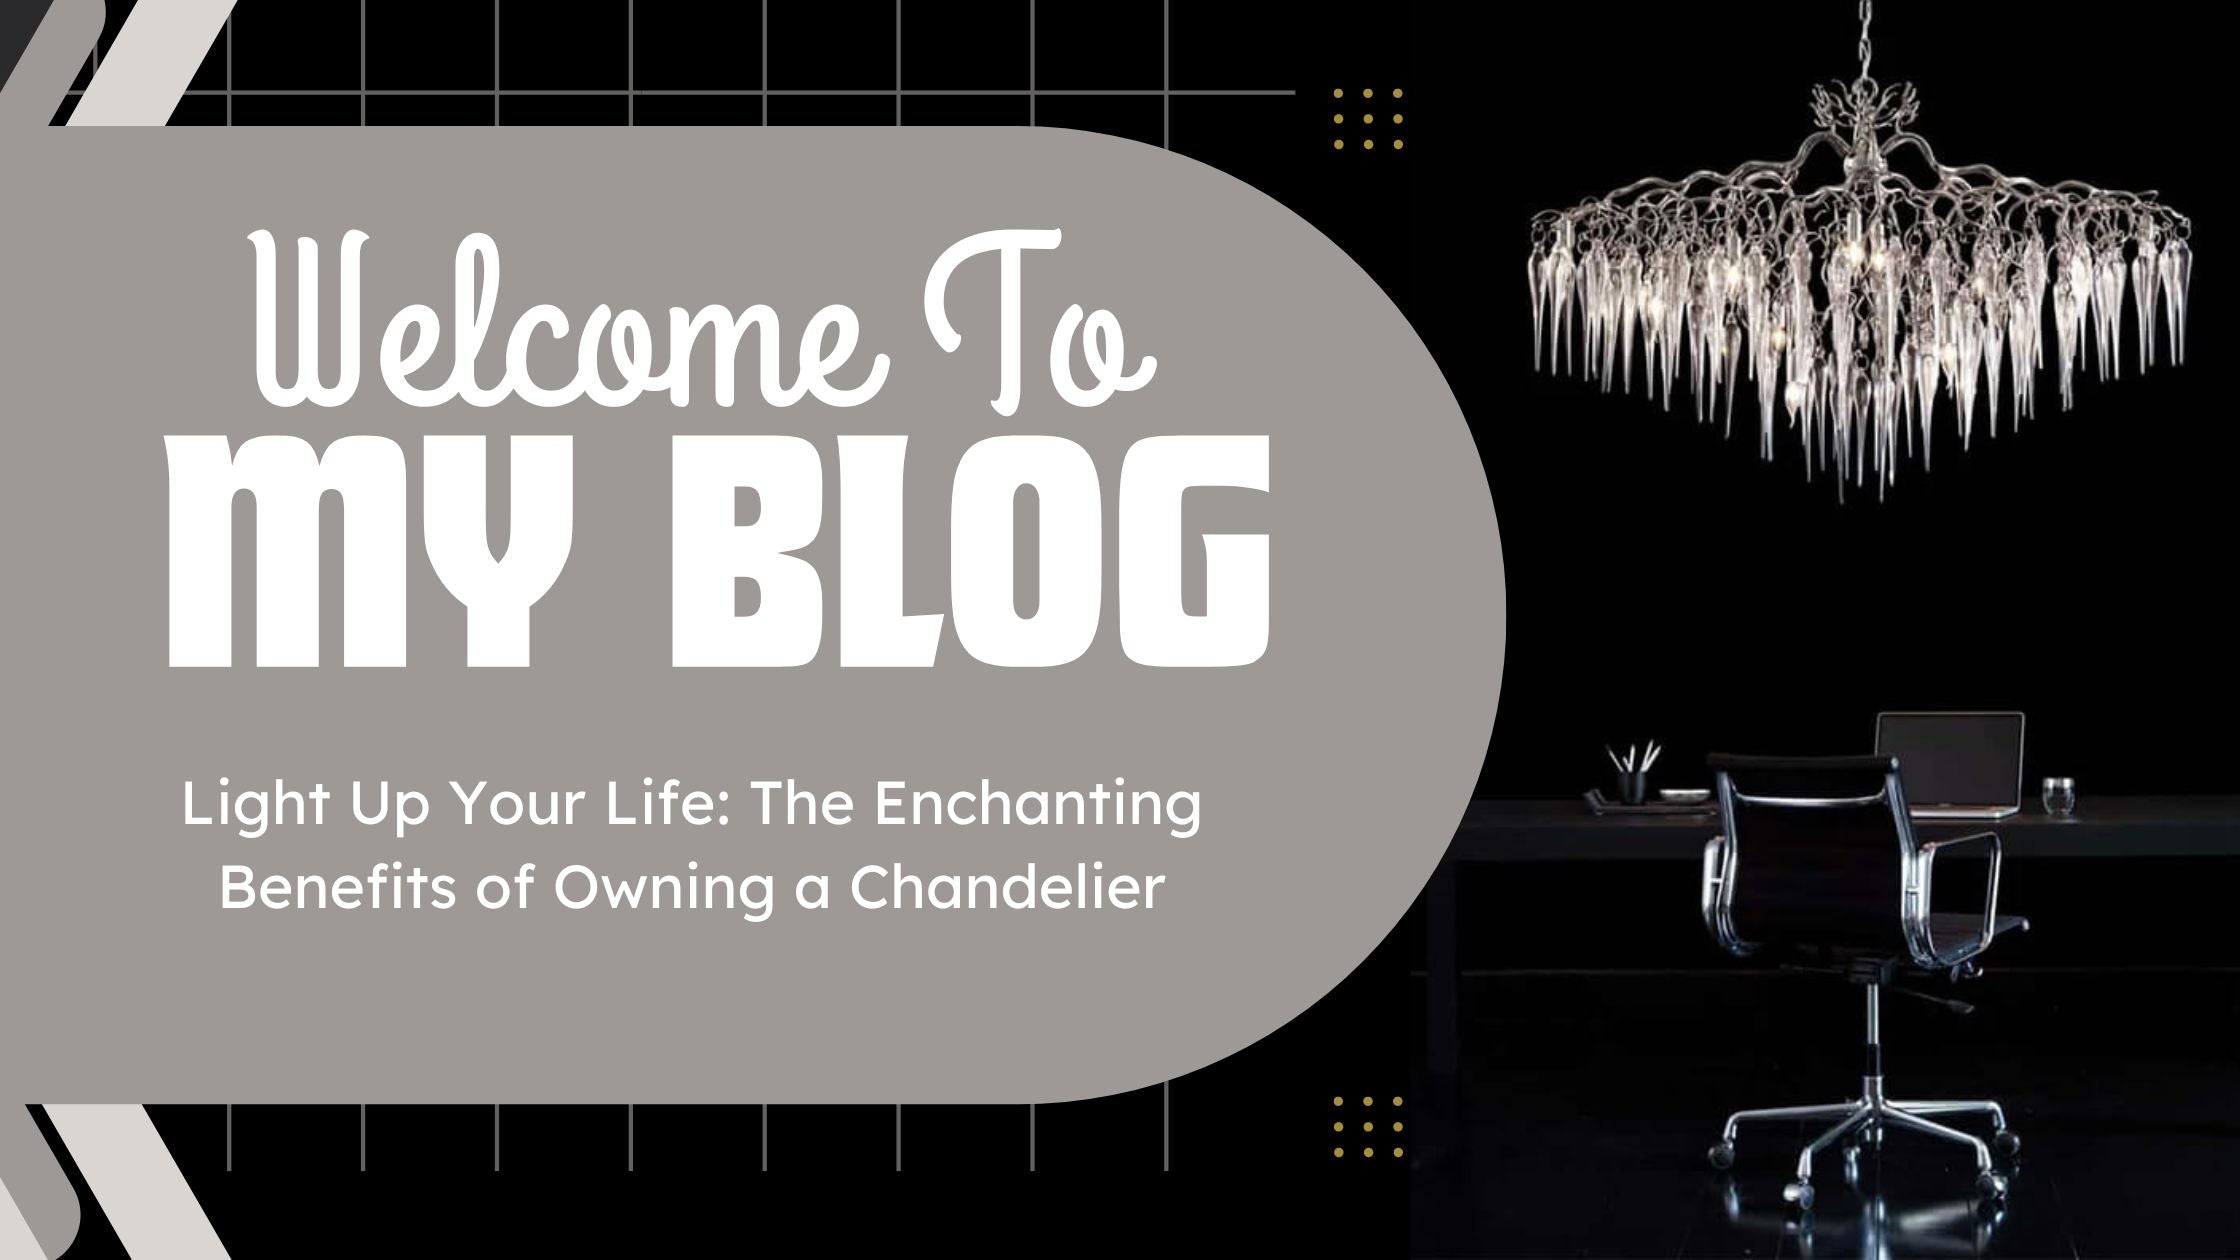 Light Up Your Life: The Enchanting Benefits of Owning a Chandelier